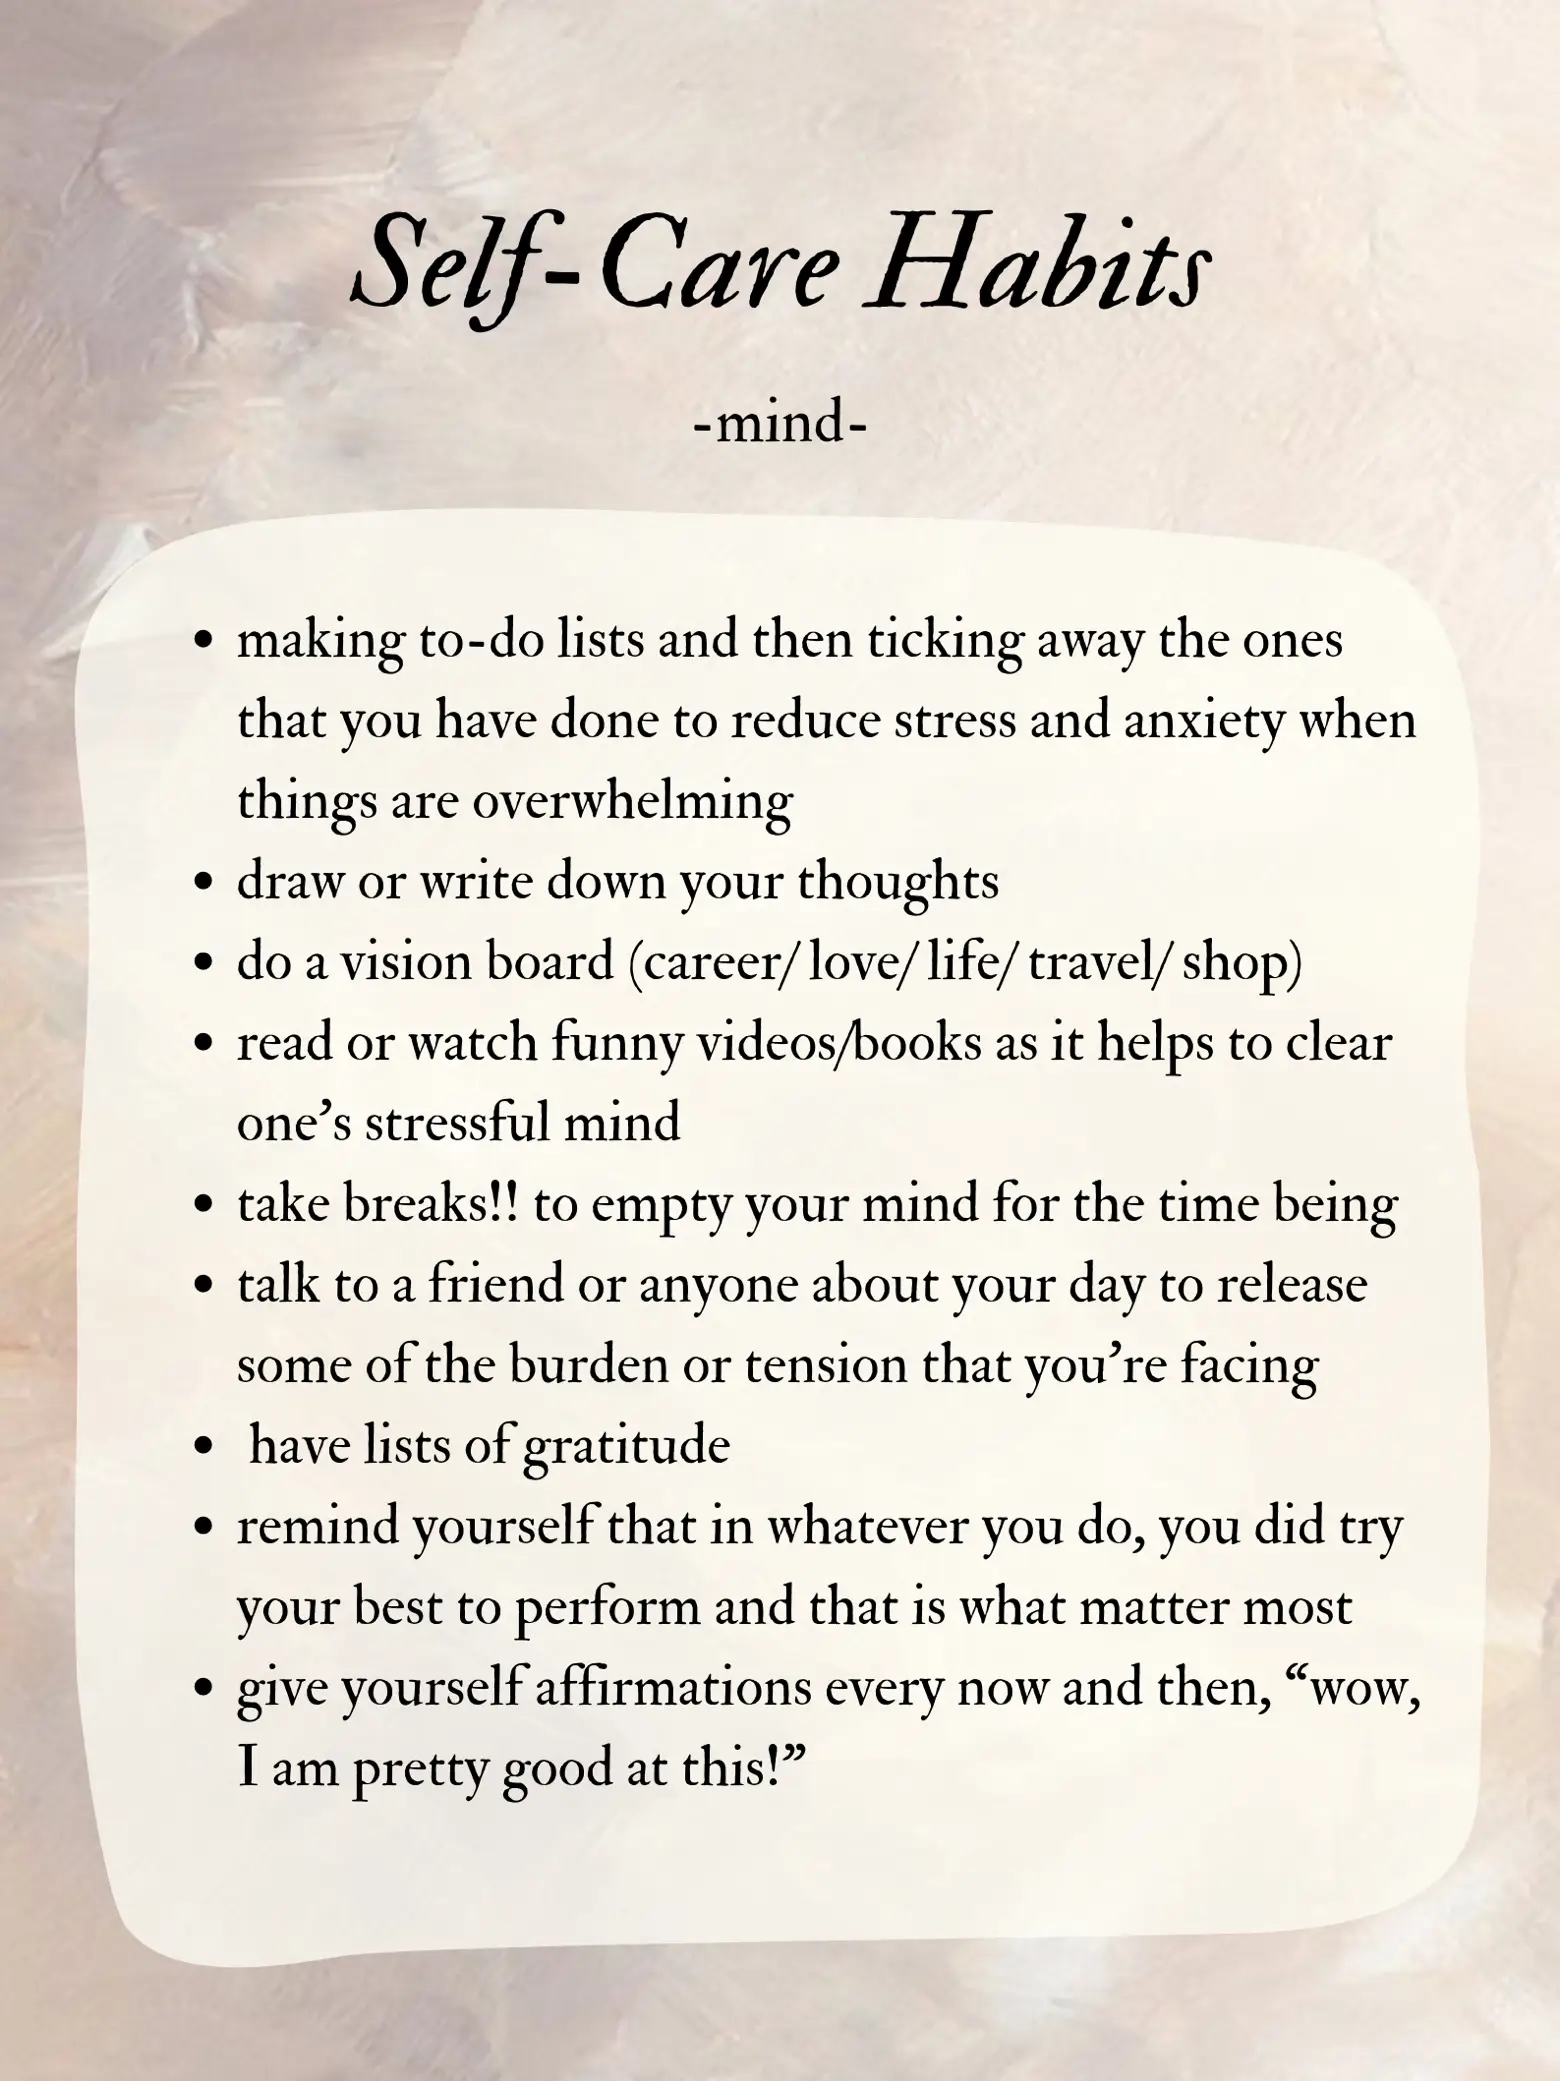 Self-Care Habits (body, mind and soul)'s images(4)